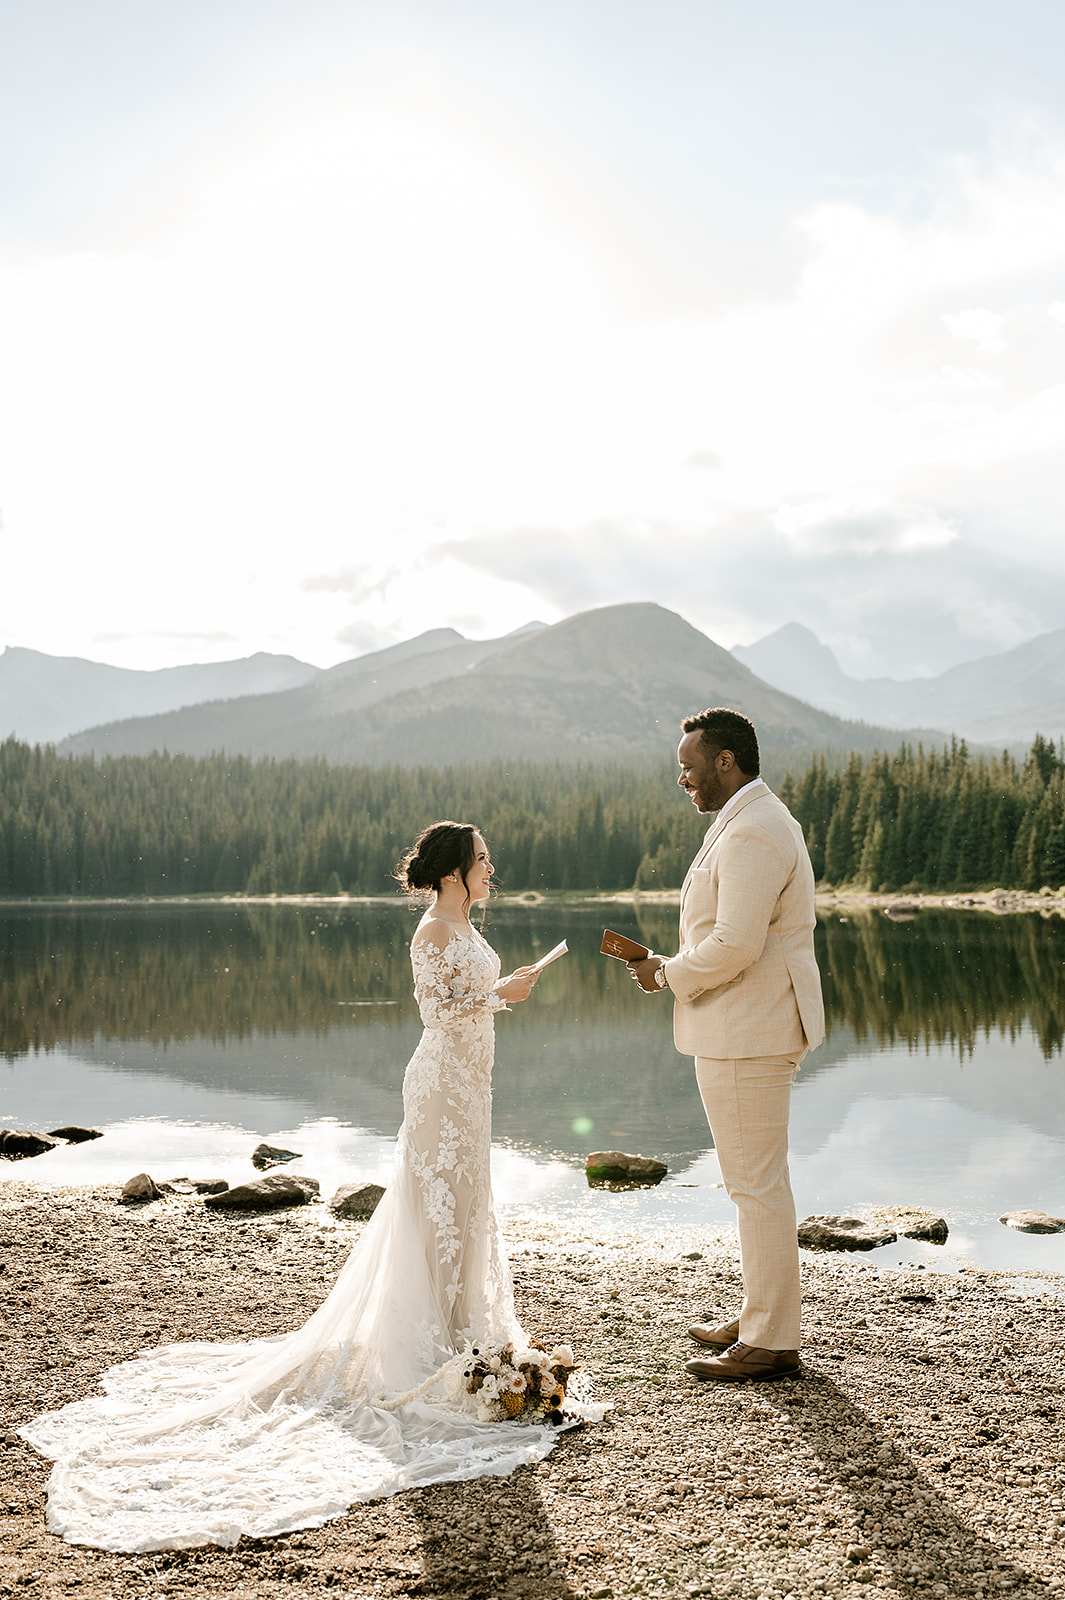 How to Plan an Elopement - Your Elopement Timeline - Vows and Peaks